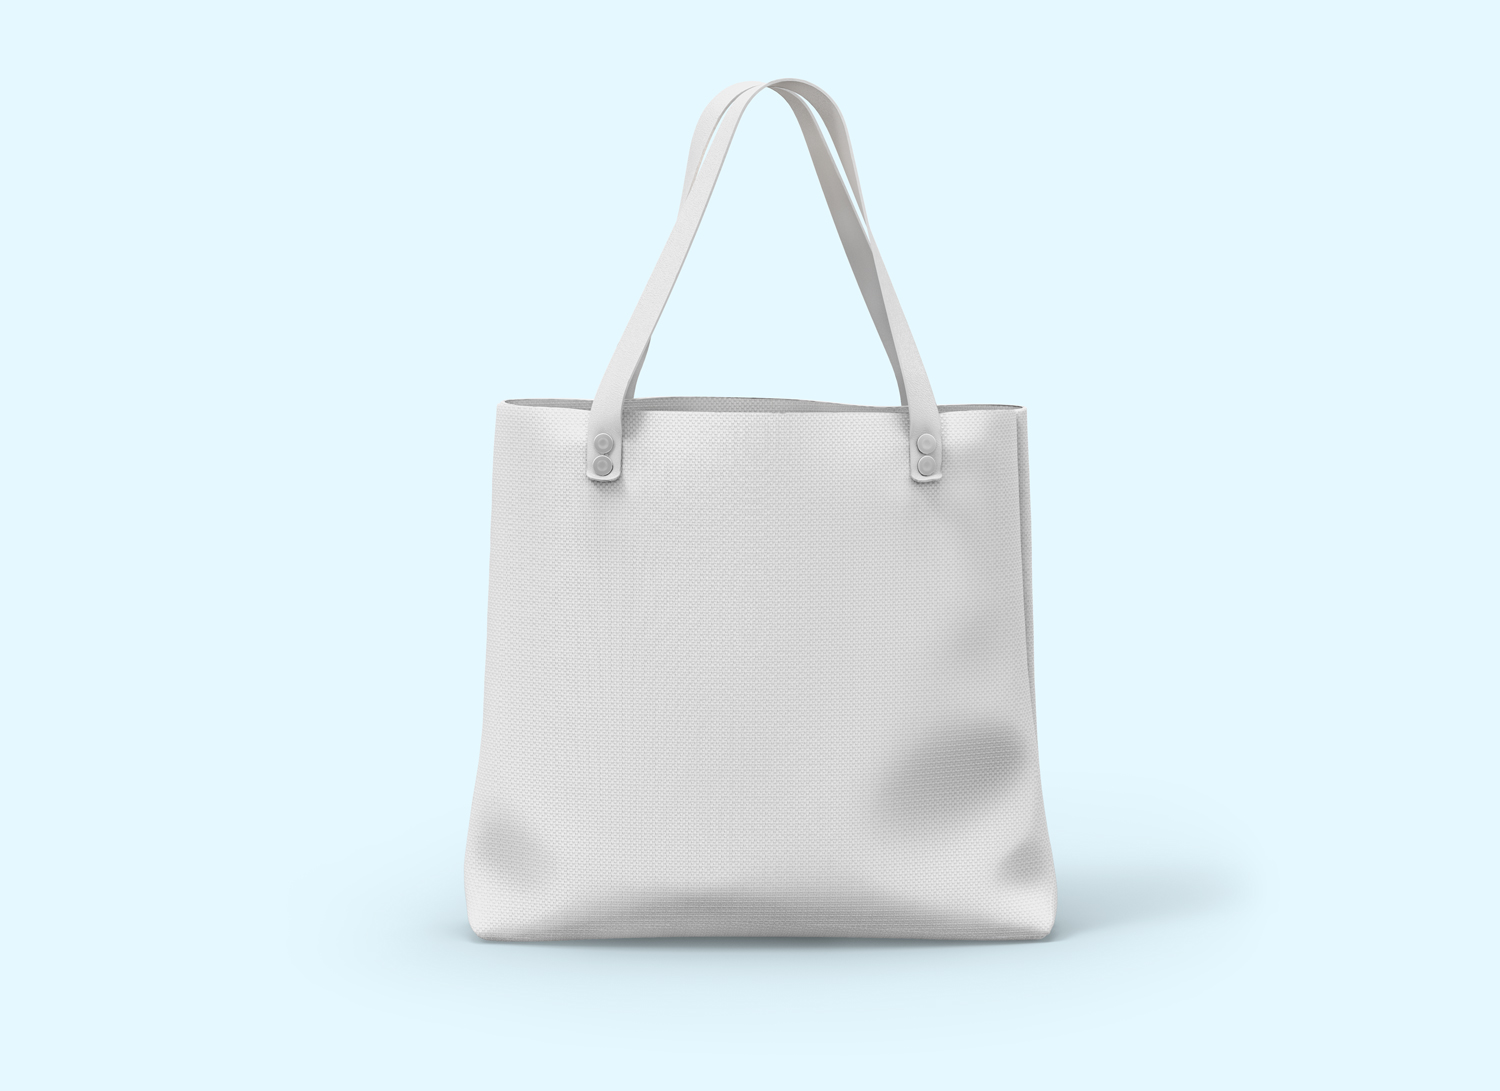 Download 29+ Canvas Bag Mockup Free Psd Pictures Yellowimages ...